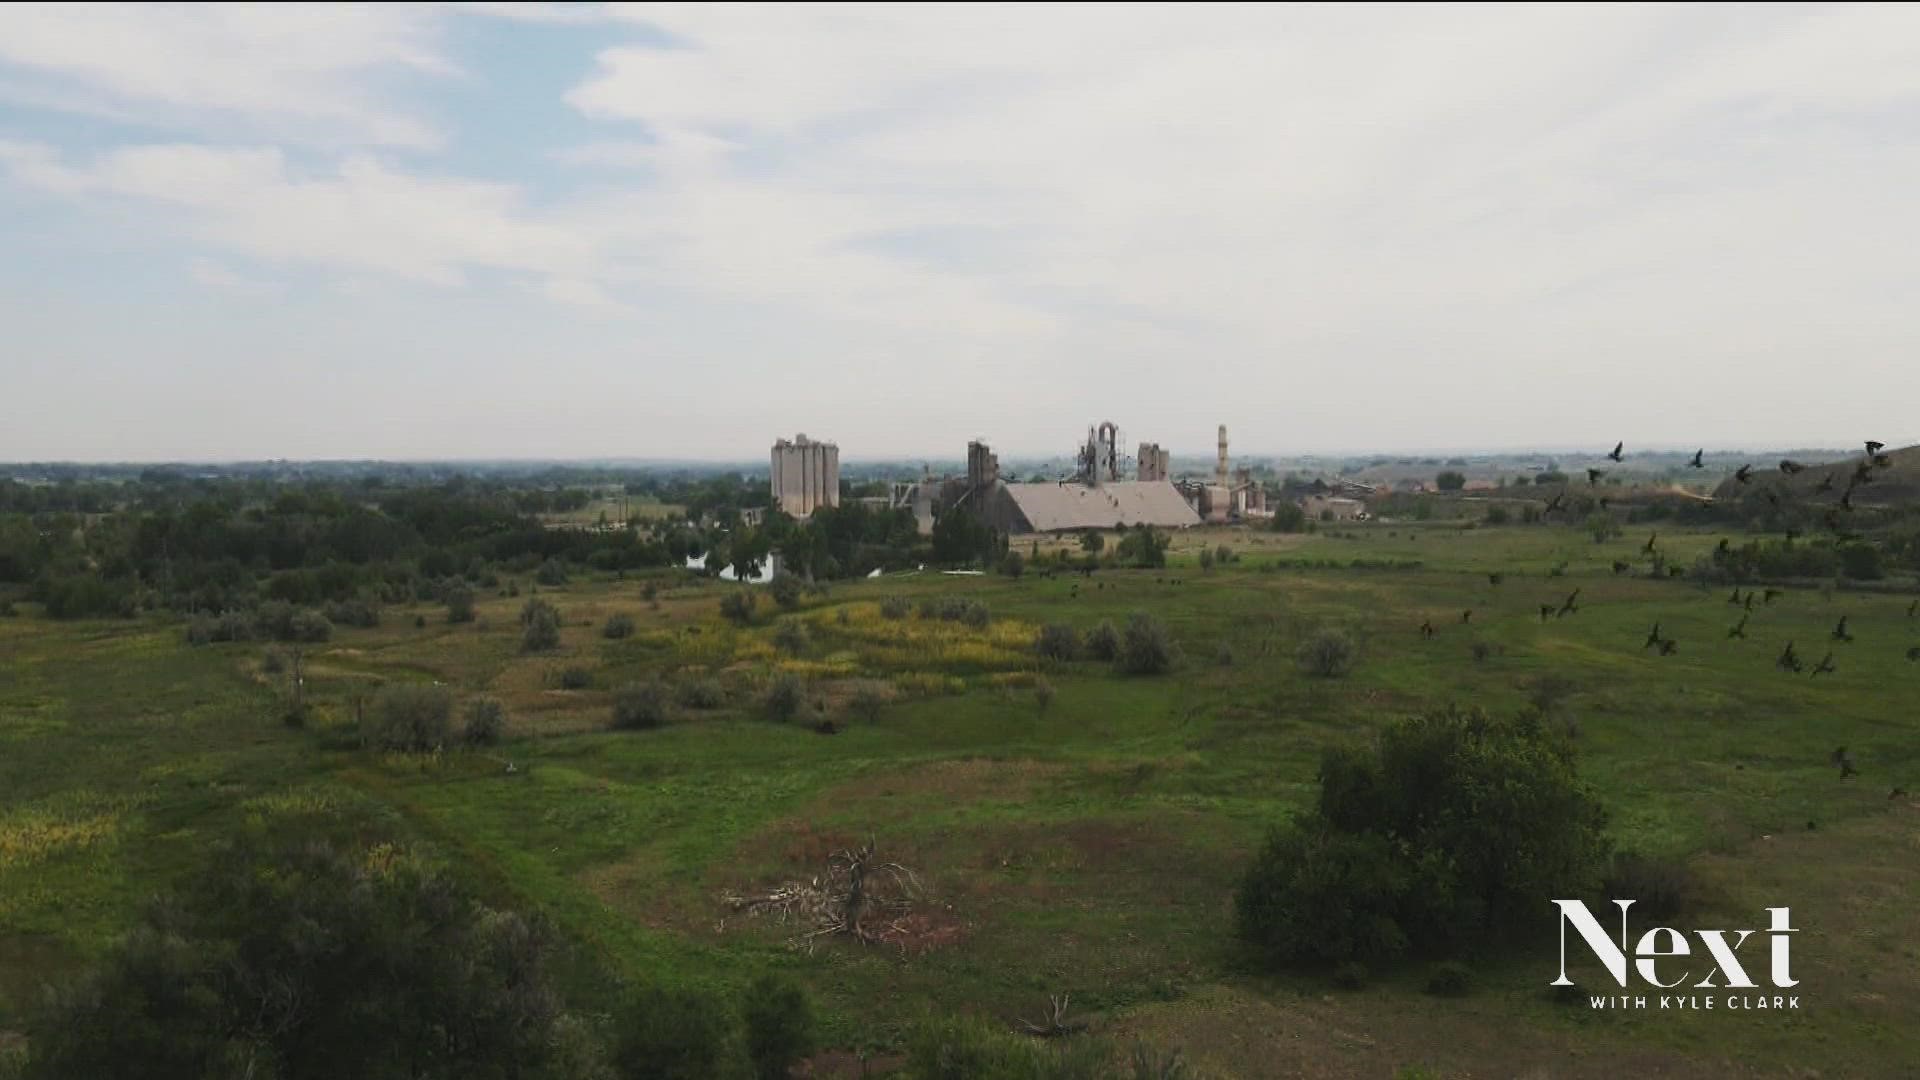 Boulder County Commissioners are to vote on a proposal to extend Cemex mining operations for 15 years in exchange for free open space. Residents are not happy.